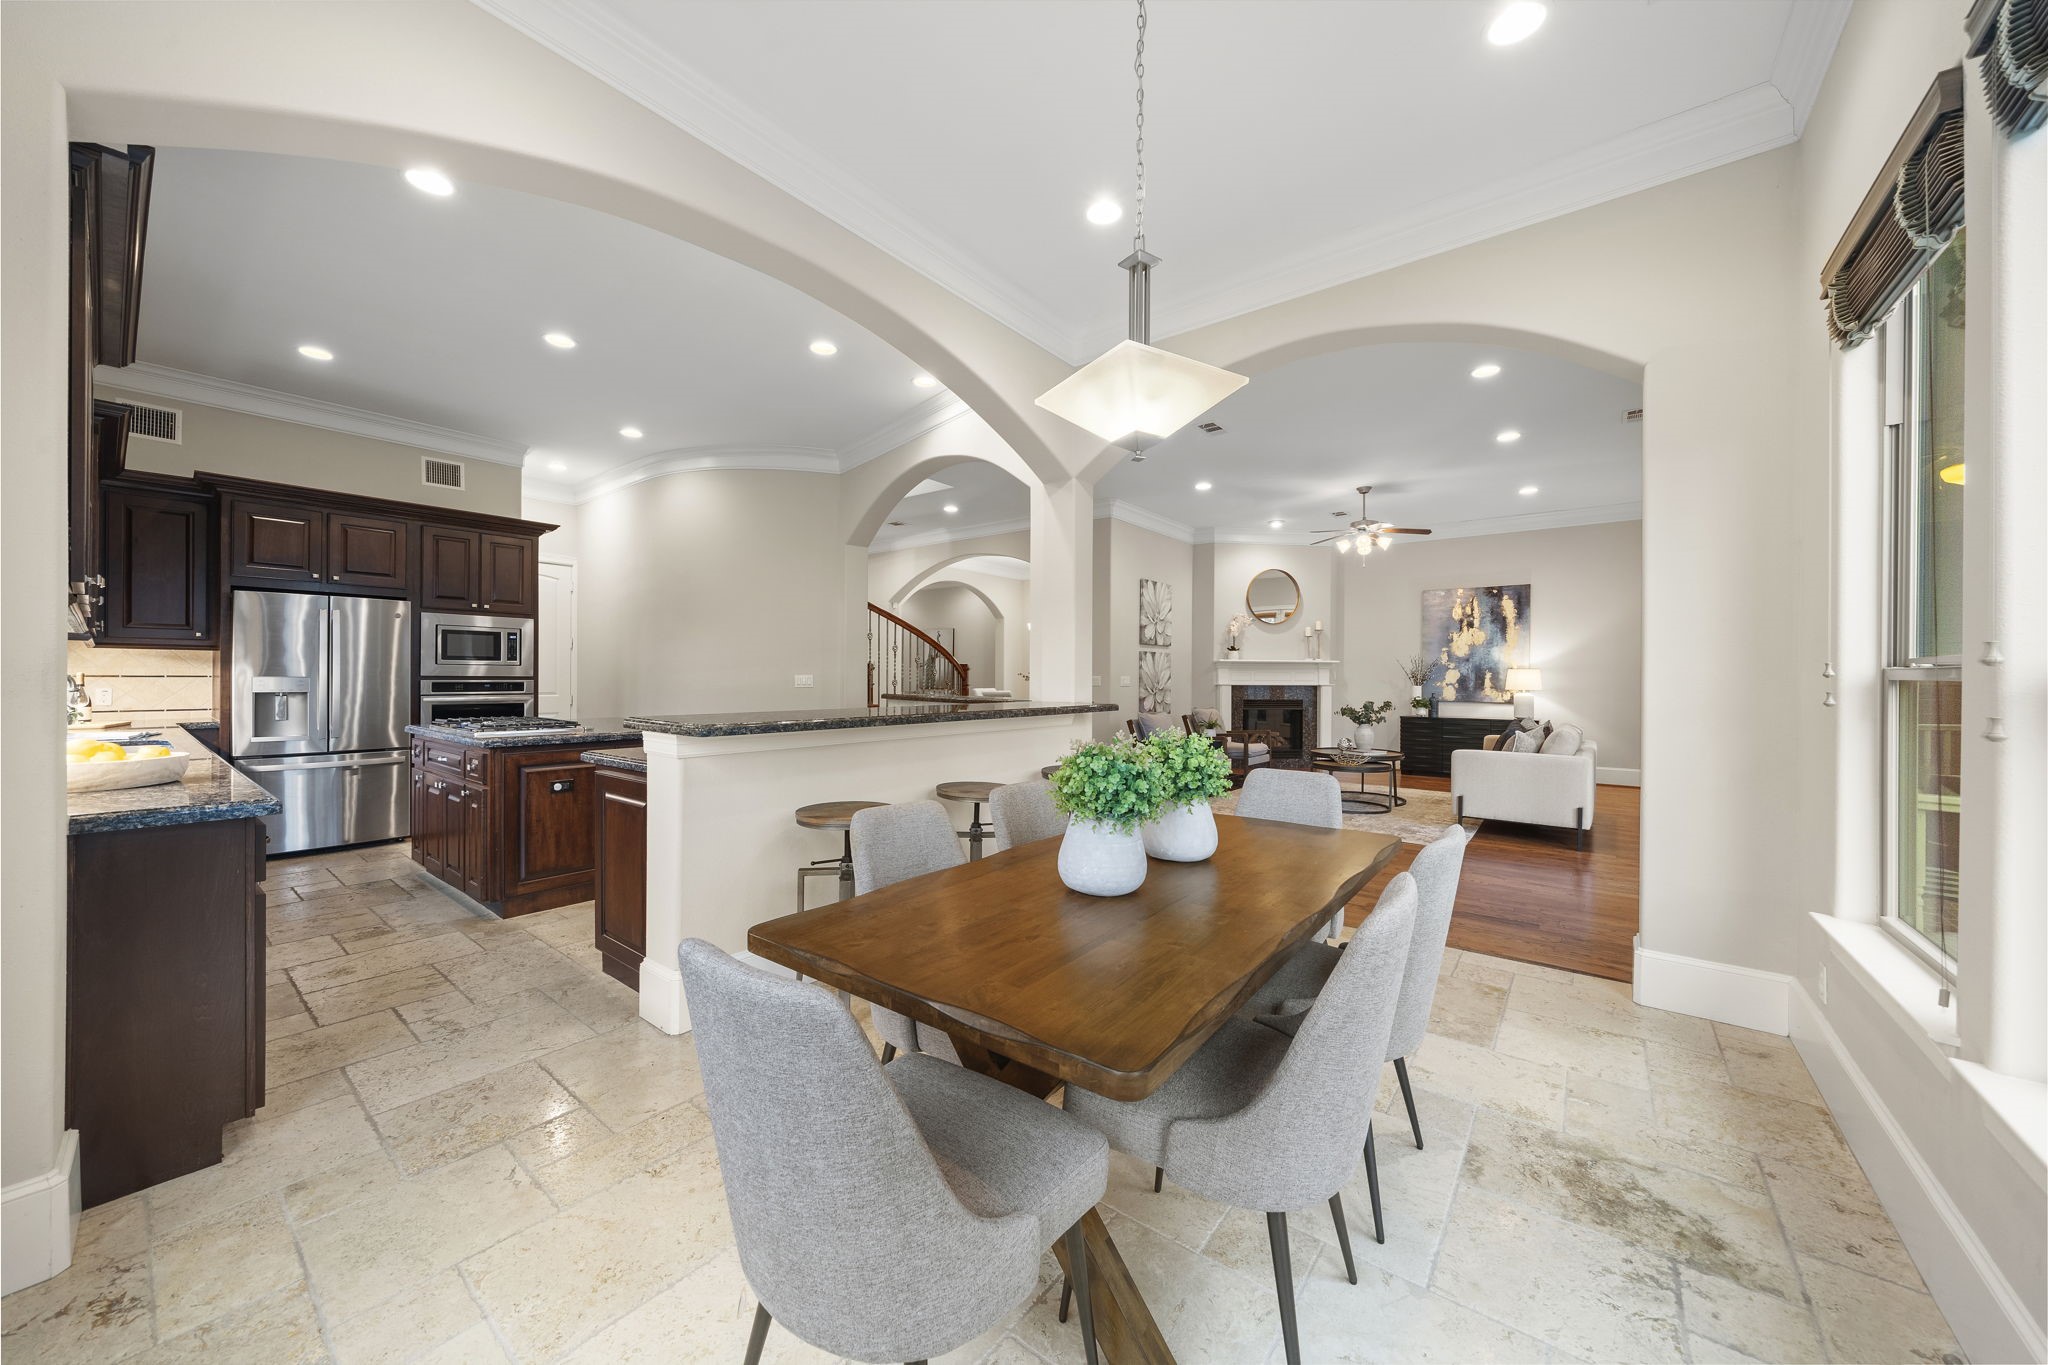 Prepare meals with ease in the open kitchen with two breakfast bars, a vast island, a breakfast nook, and a convenient layout that provides easy access to the dining and living areas.